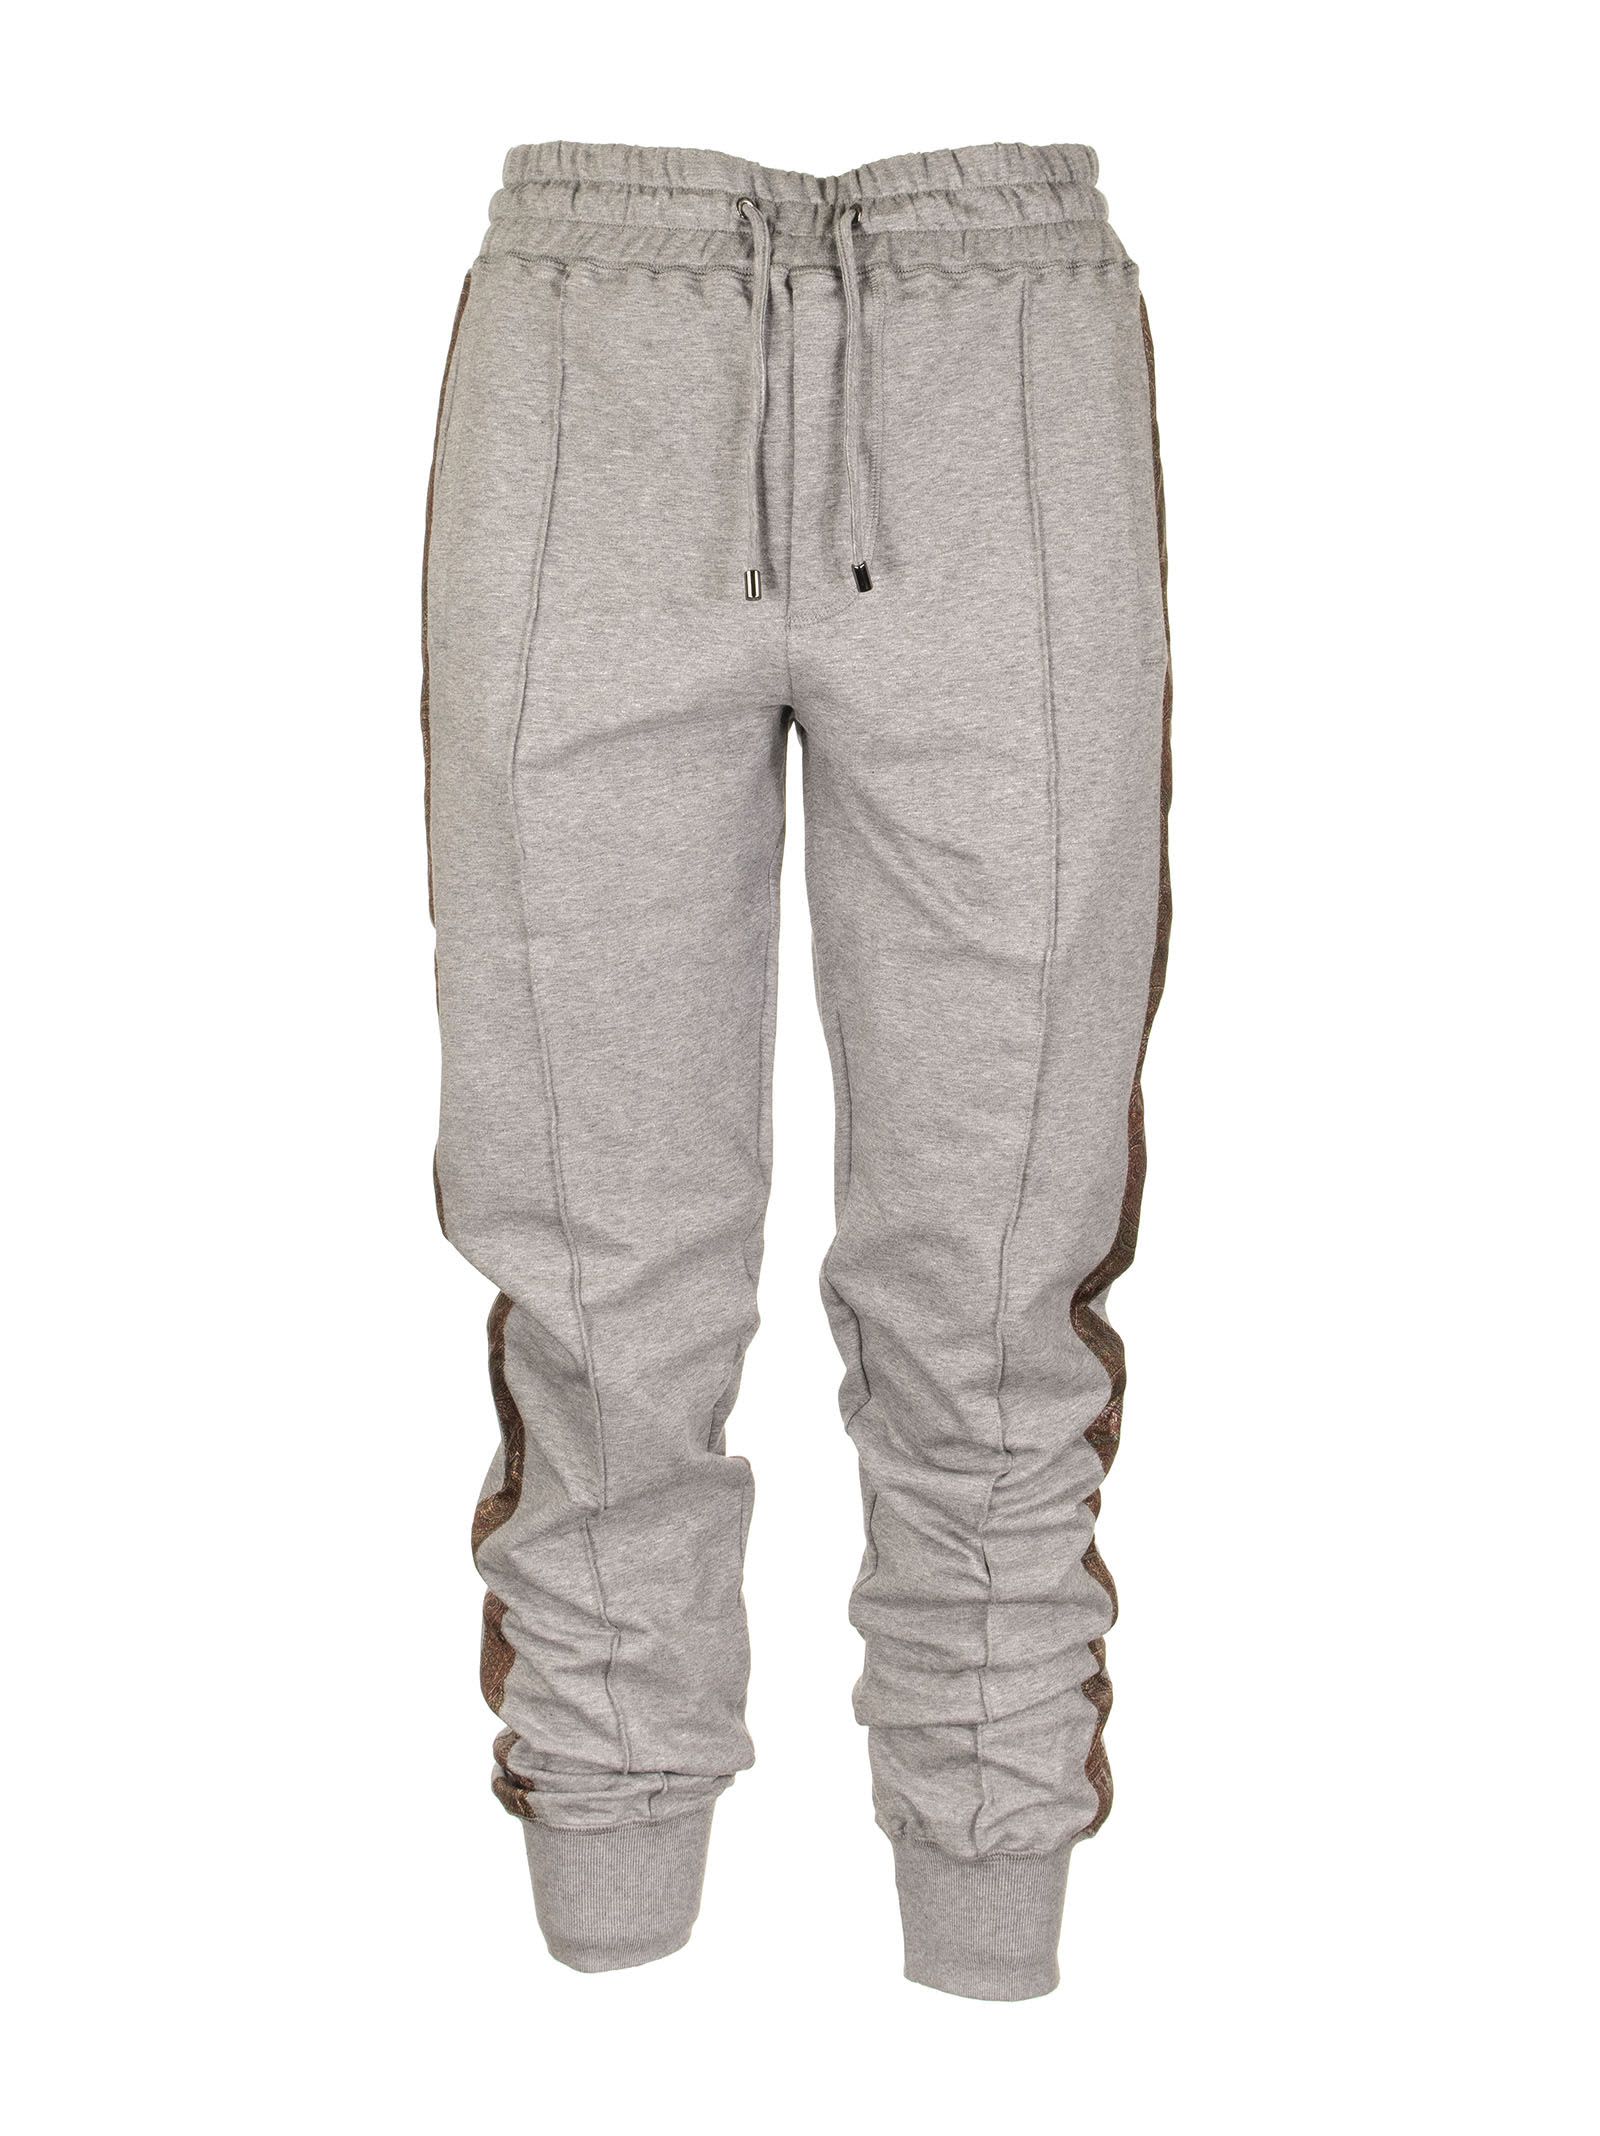 ETRO JOGGING TROUSERS WITH PAISLEY DETAILS,1Y103 8280 3